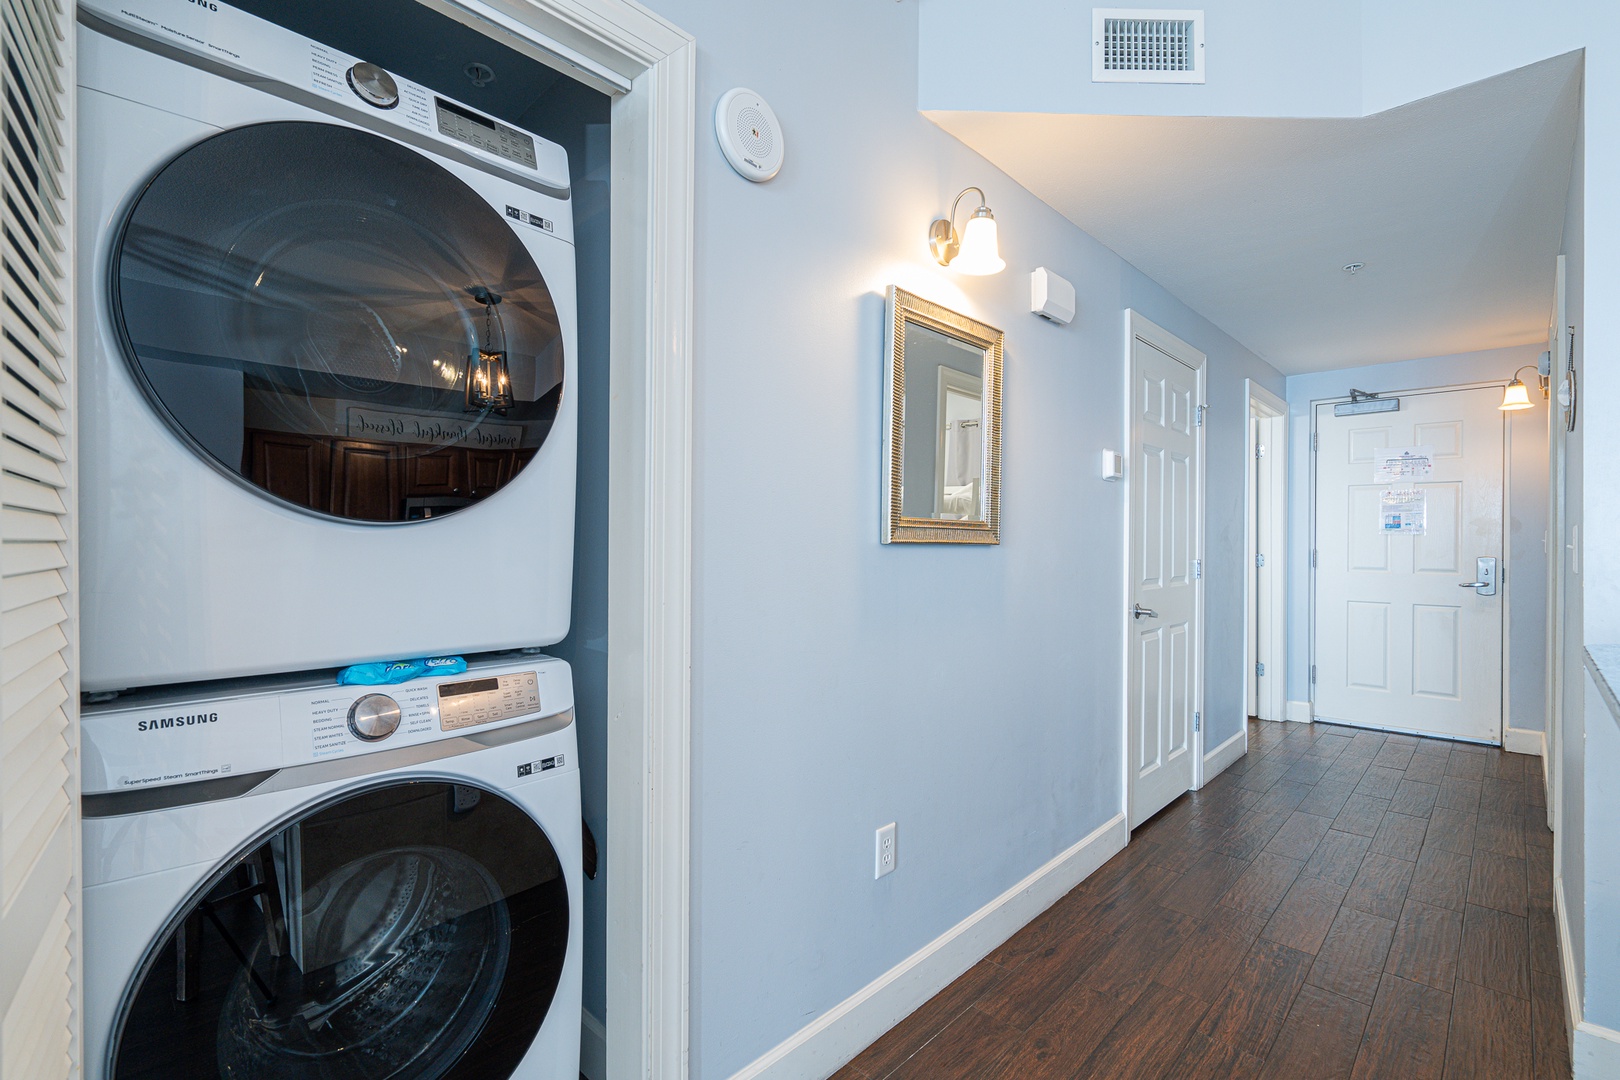 Private laundry is available for your stay, tucked away by the kitchen area